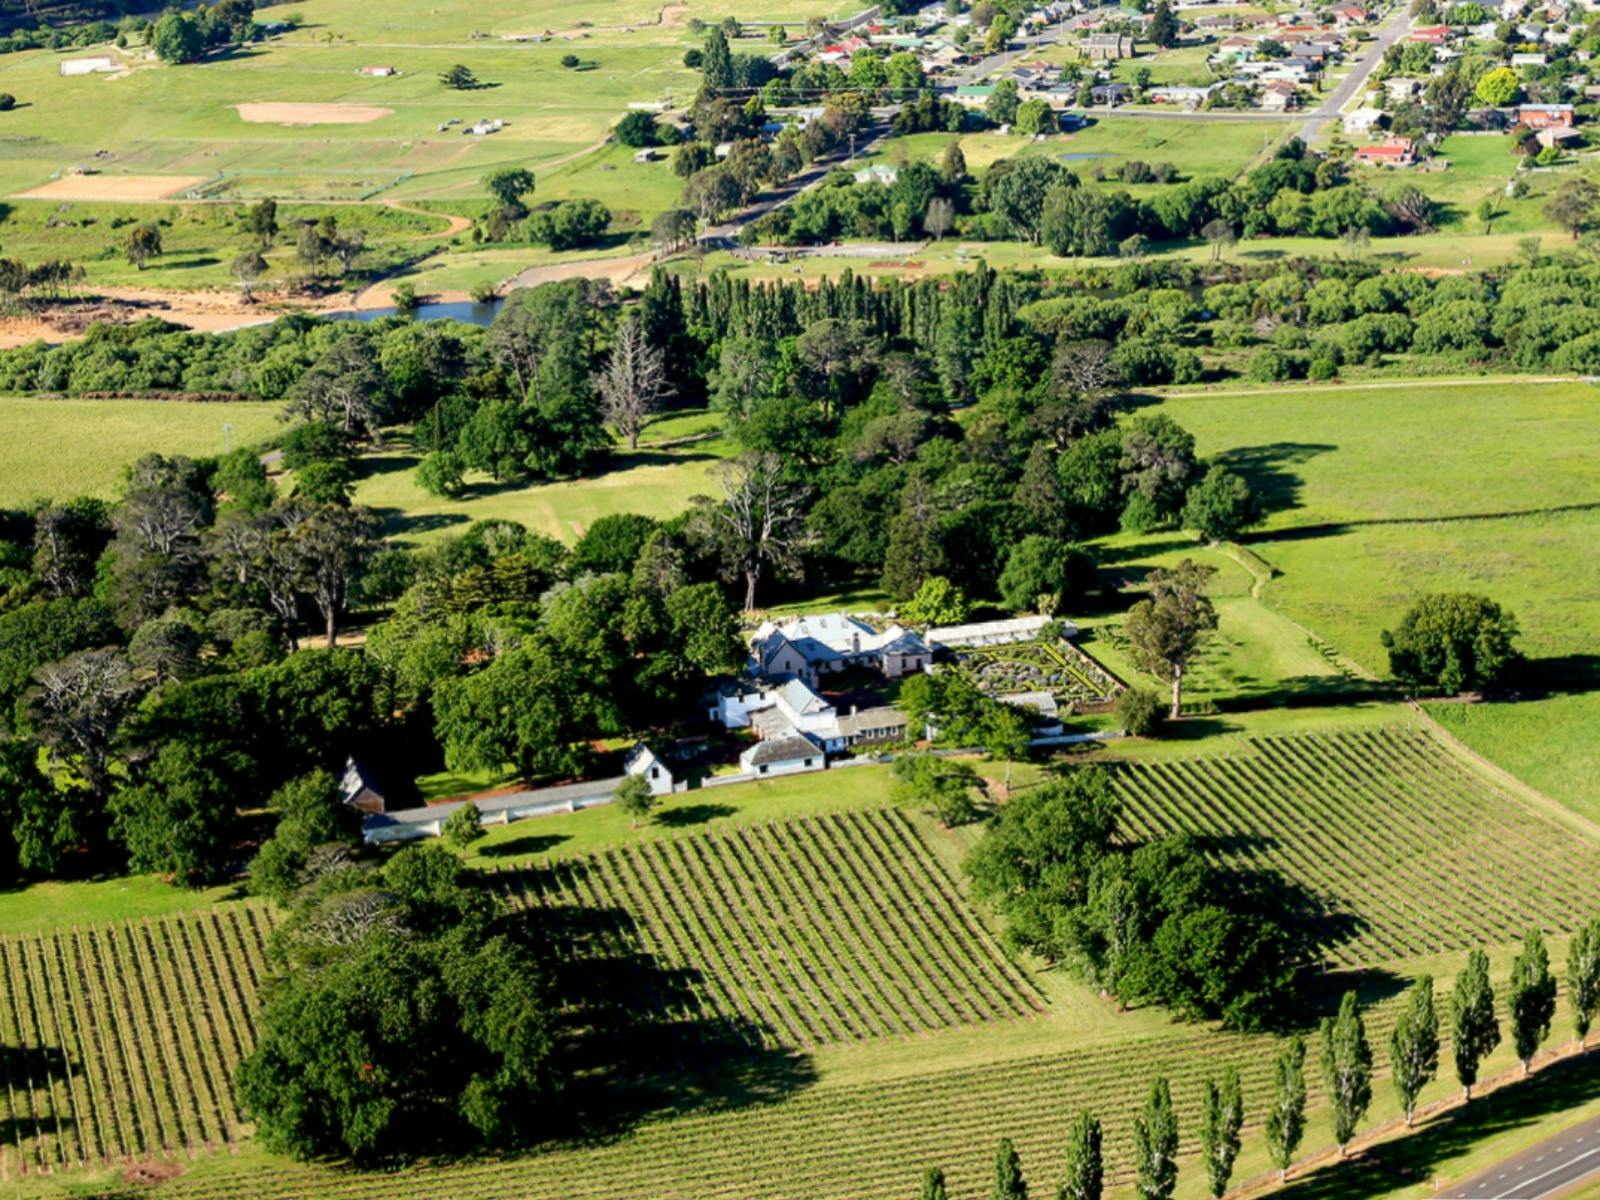 Aerial view of House im centre, surrounded by vineyard, large trees, grassy paddocks